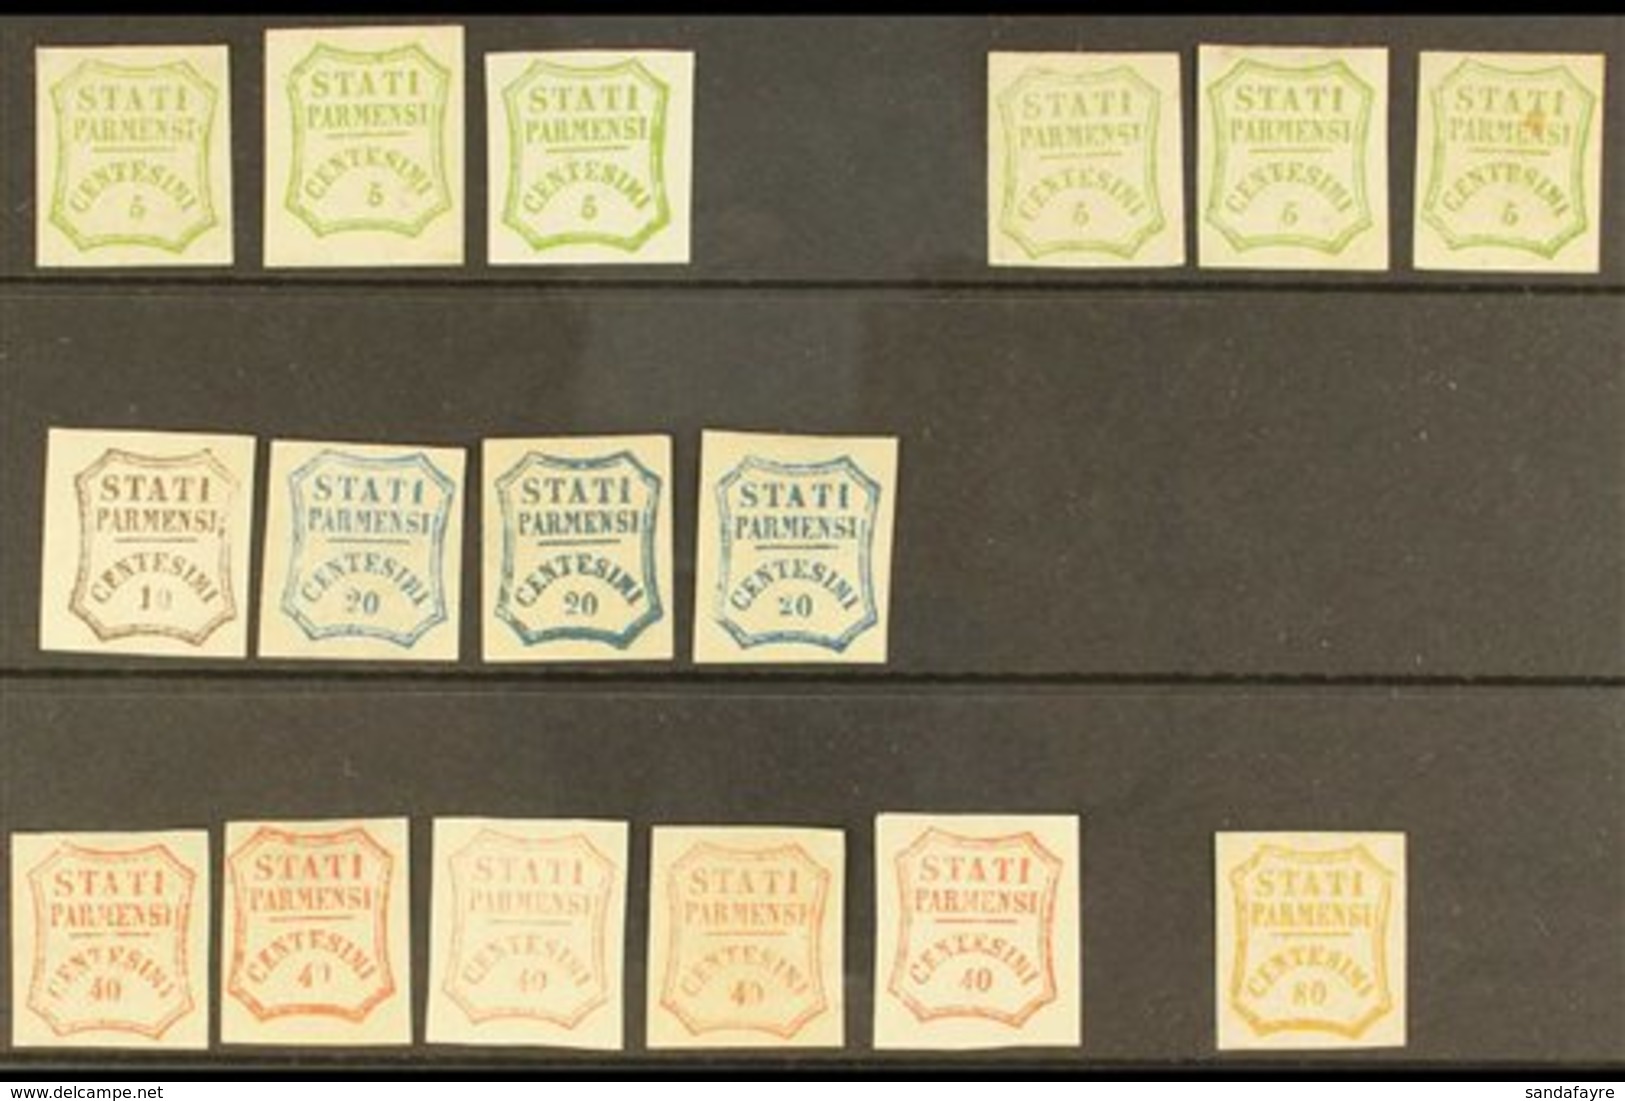 PARMA 1859 Provisional Government Issues Range, Sass 12 - 18, With 5c Yellow Green Mint (3), Mint No Gum (3), Then Mint  - Sin Clasificación